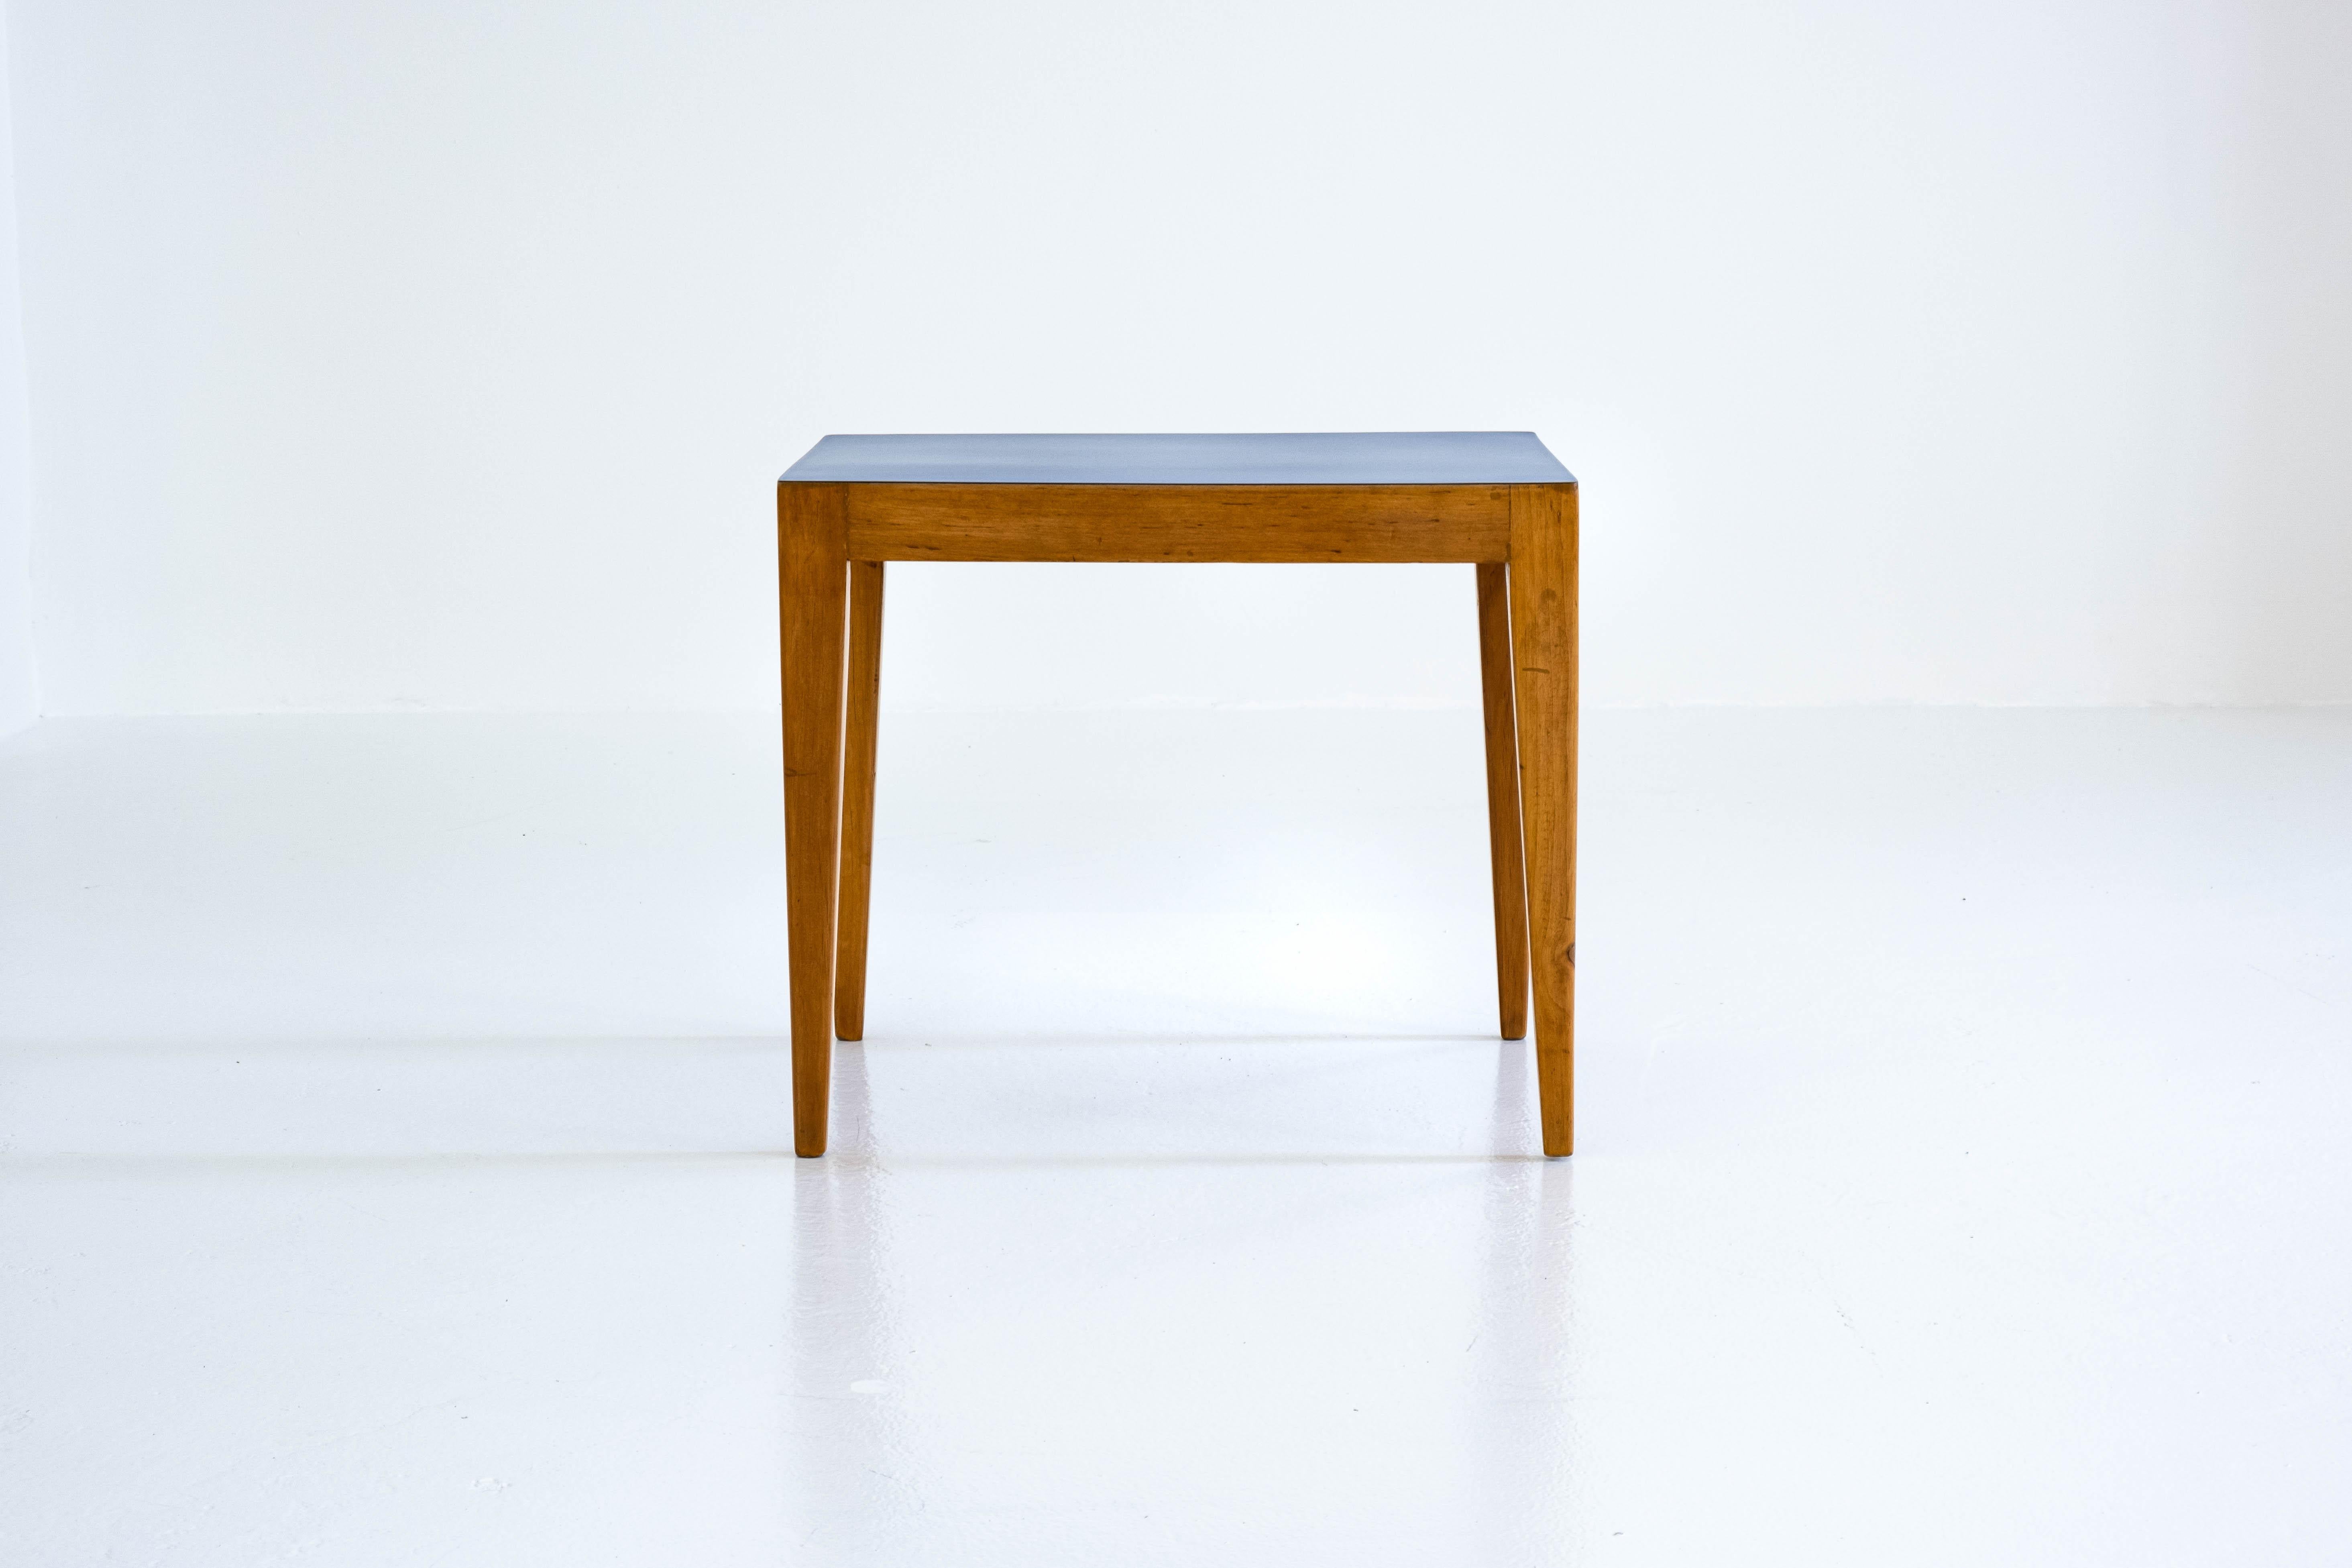 Laminate Puristic, Mediterranean Blue Top, Side Table Attr. to Gio Ponti, Italy, 1960s